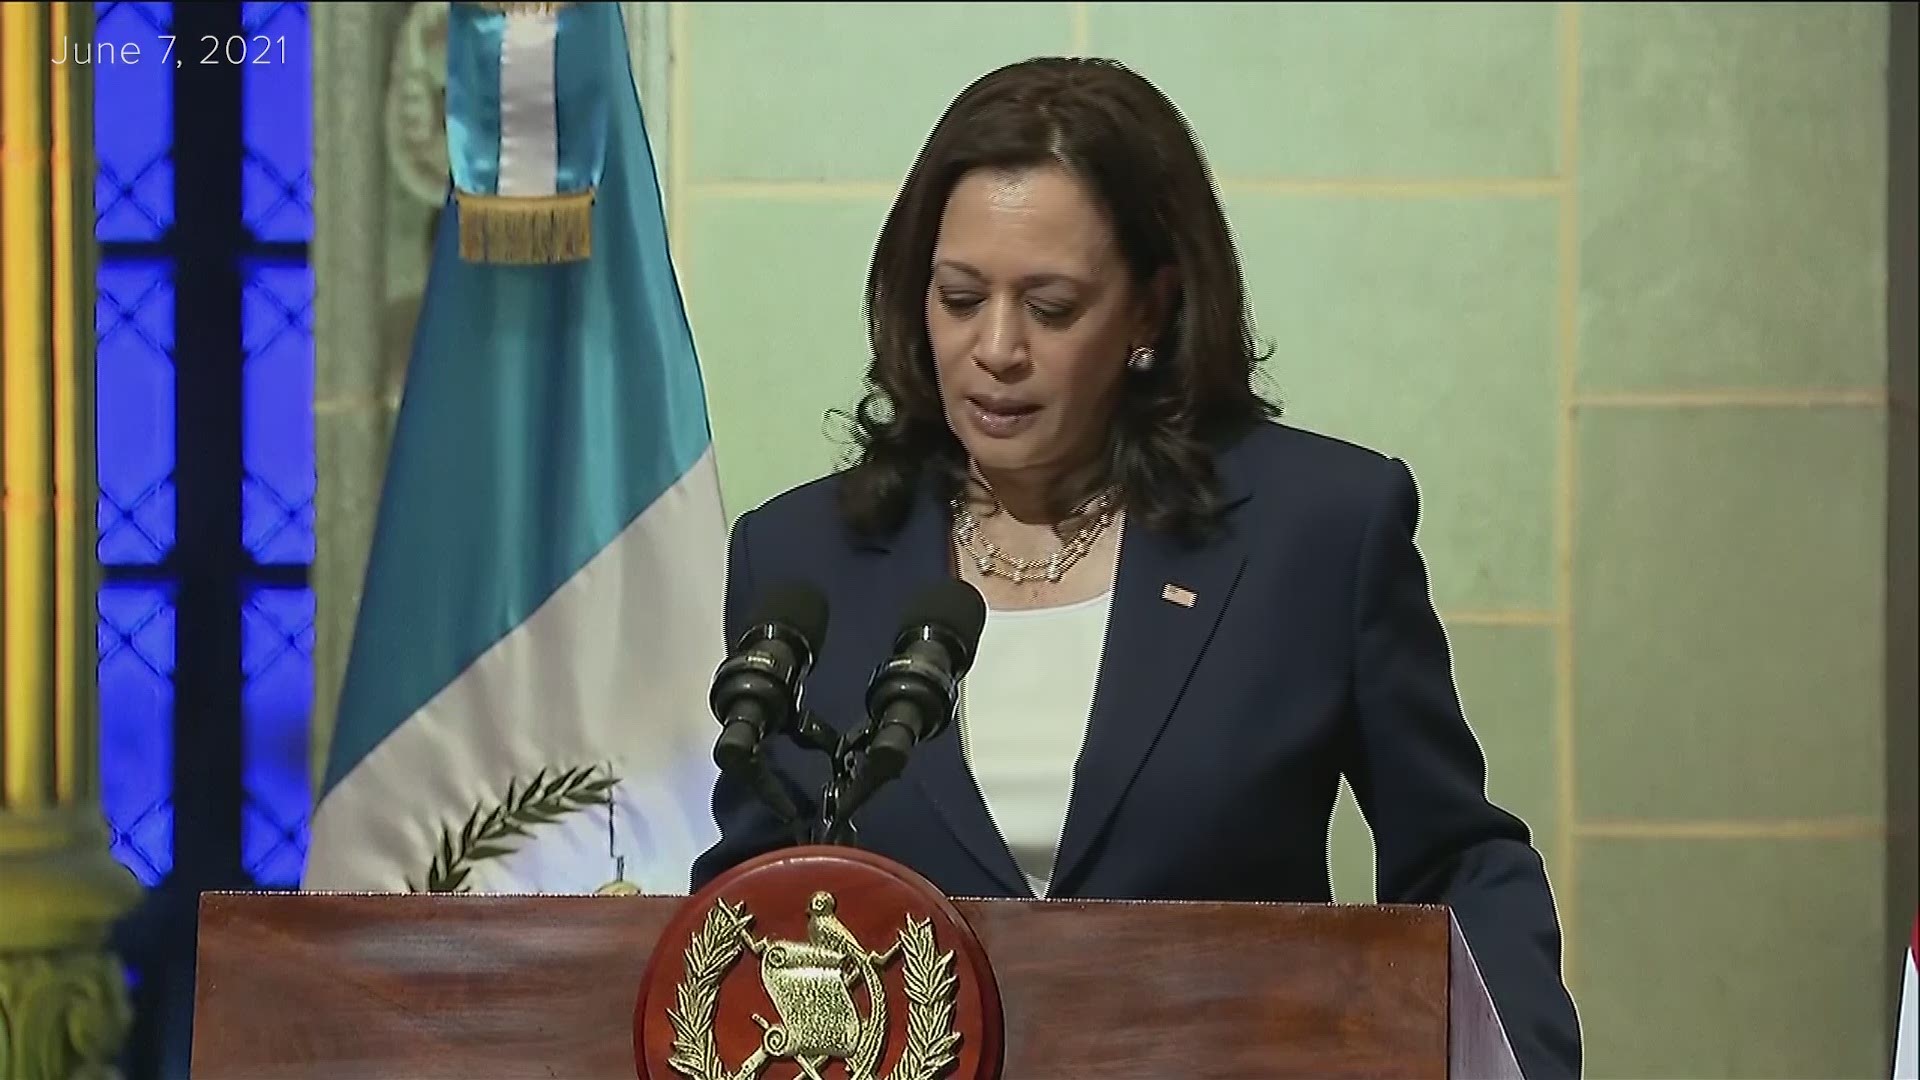 Speaking in Guatemala on June 7, 2021, Vice President Kamala Harris emphasized 'hope at home' for Guatemalans while warning them not to trek to the U.S. border.